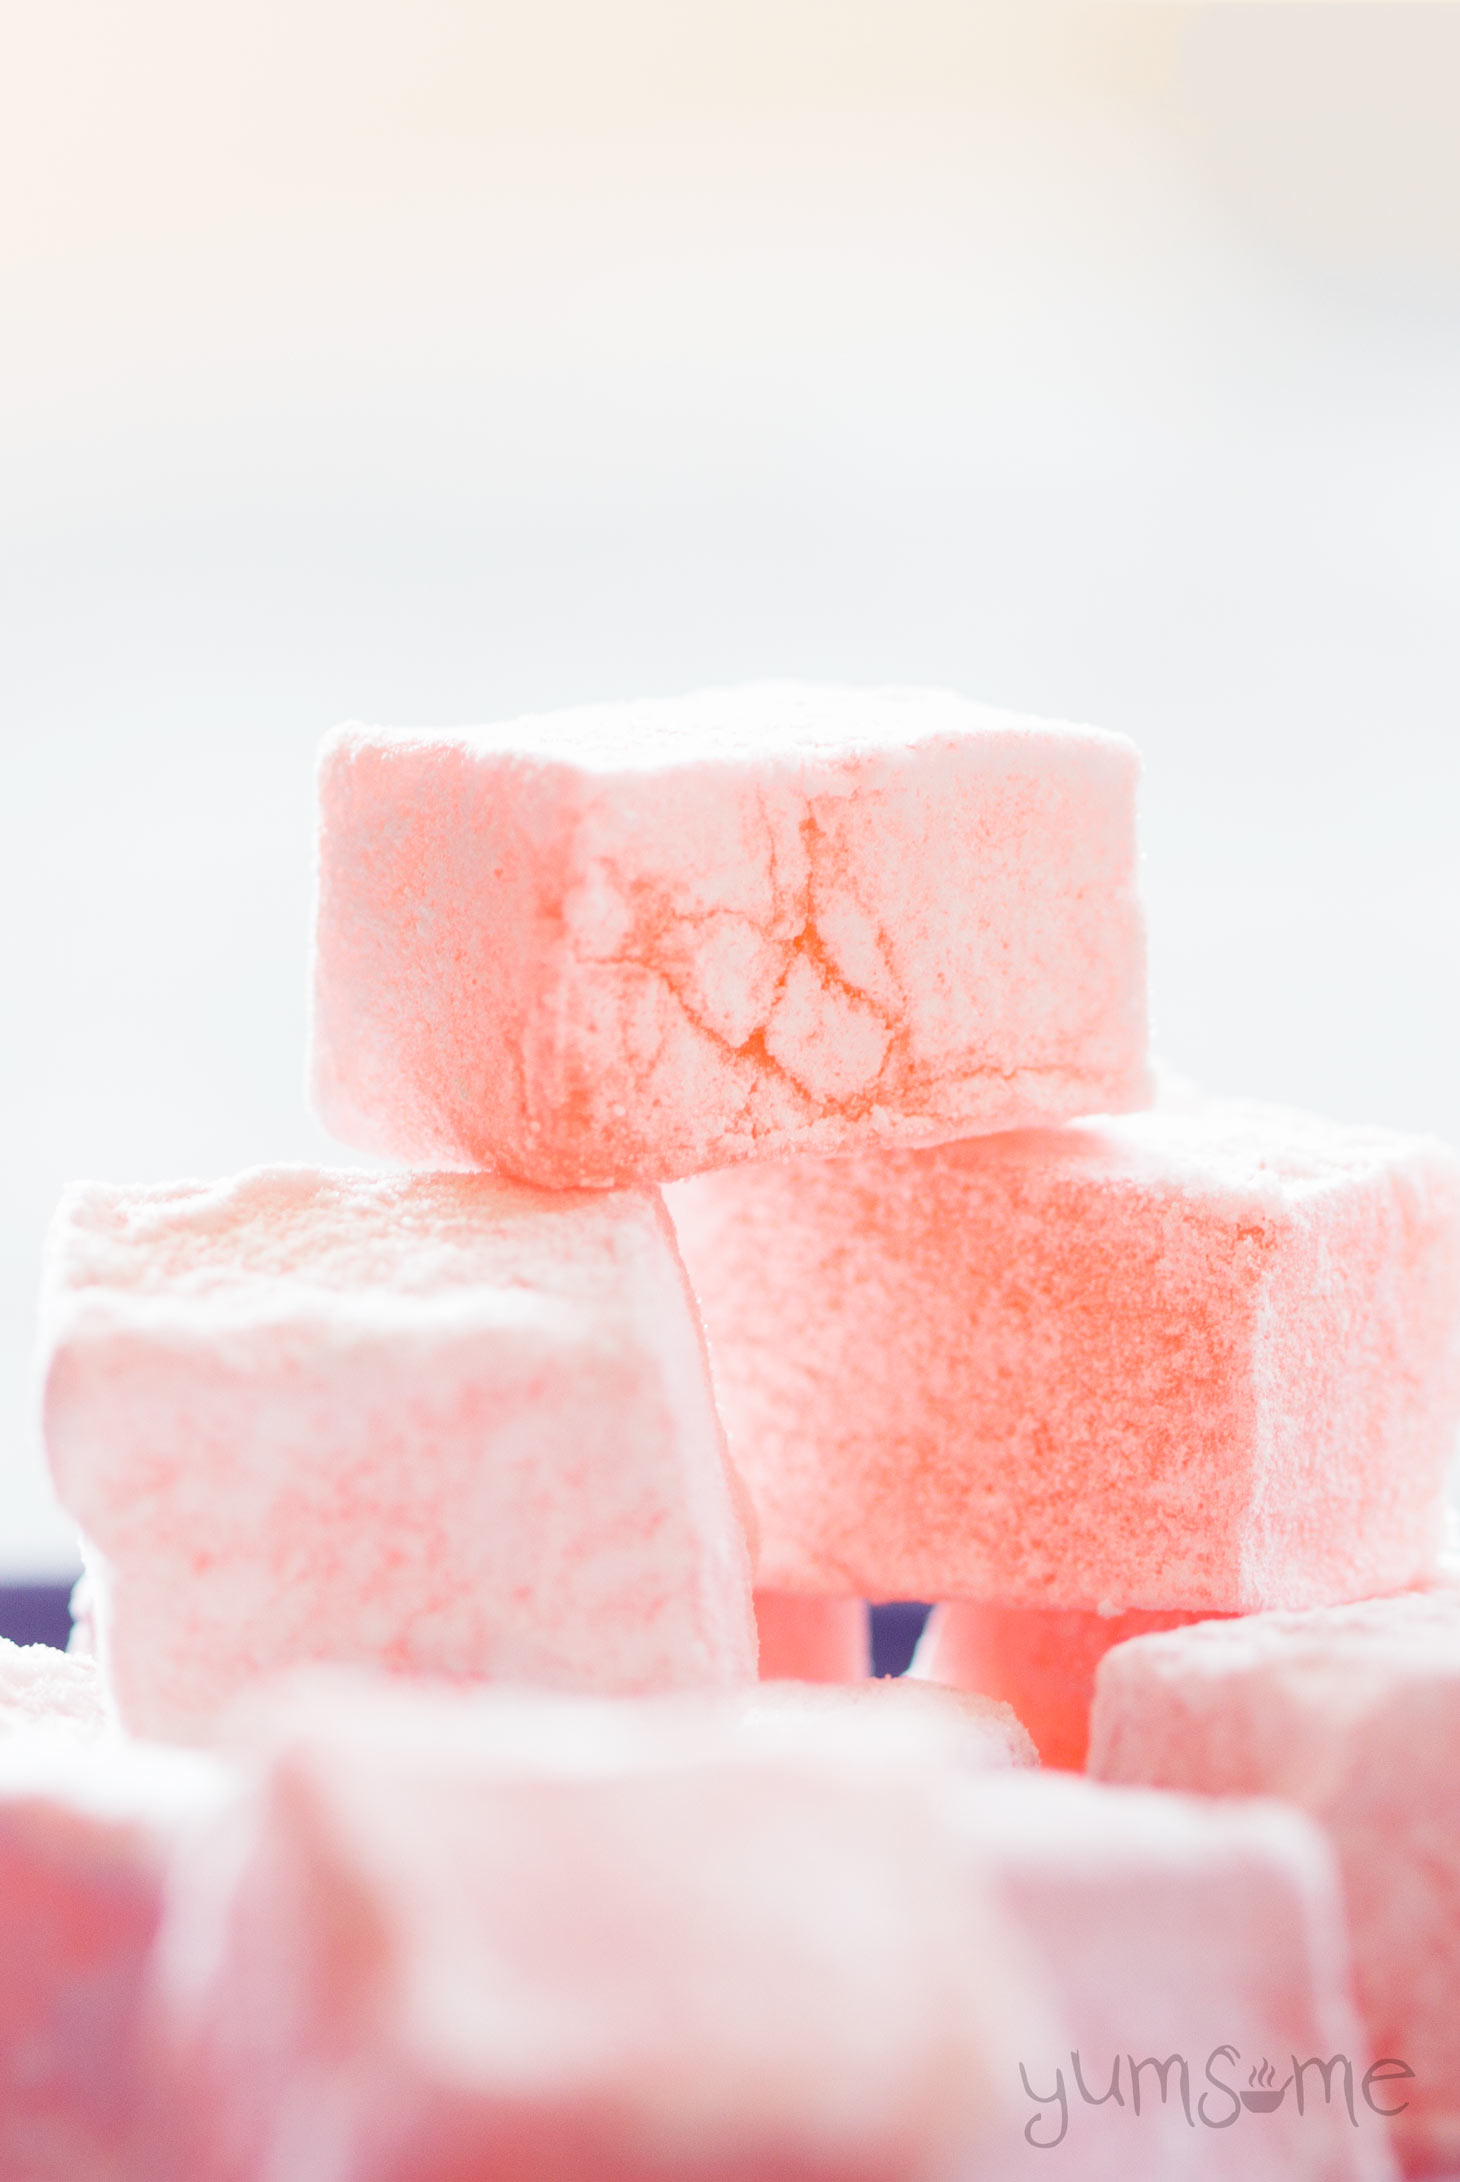 A stack of pink Turkish delight (lokum) against a pale background..